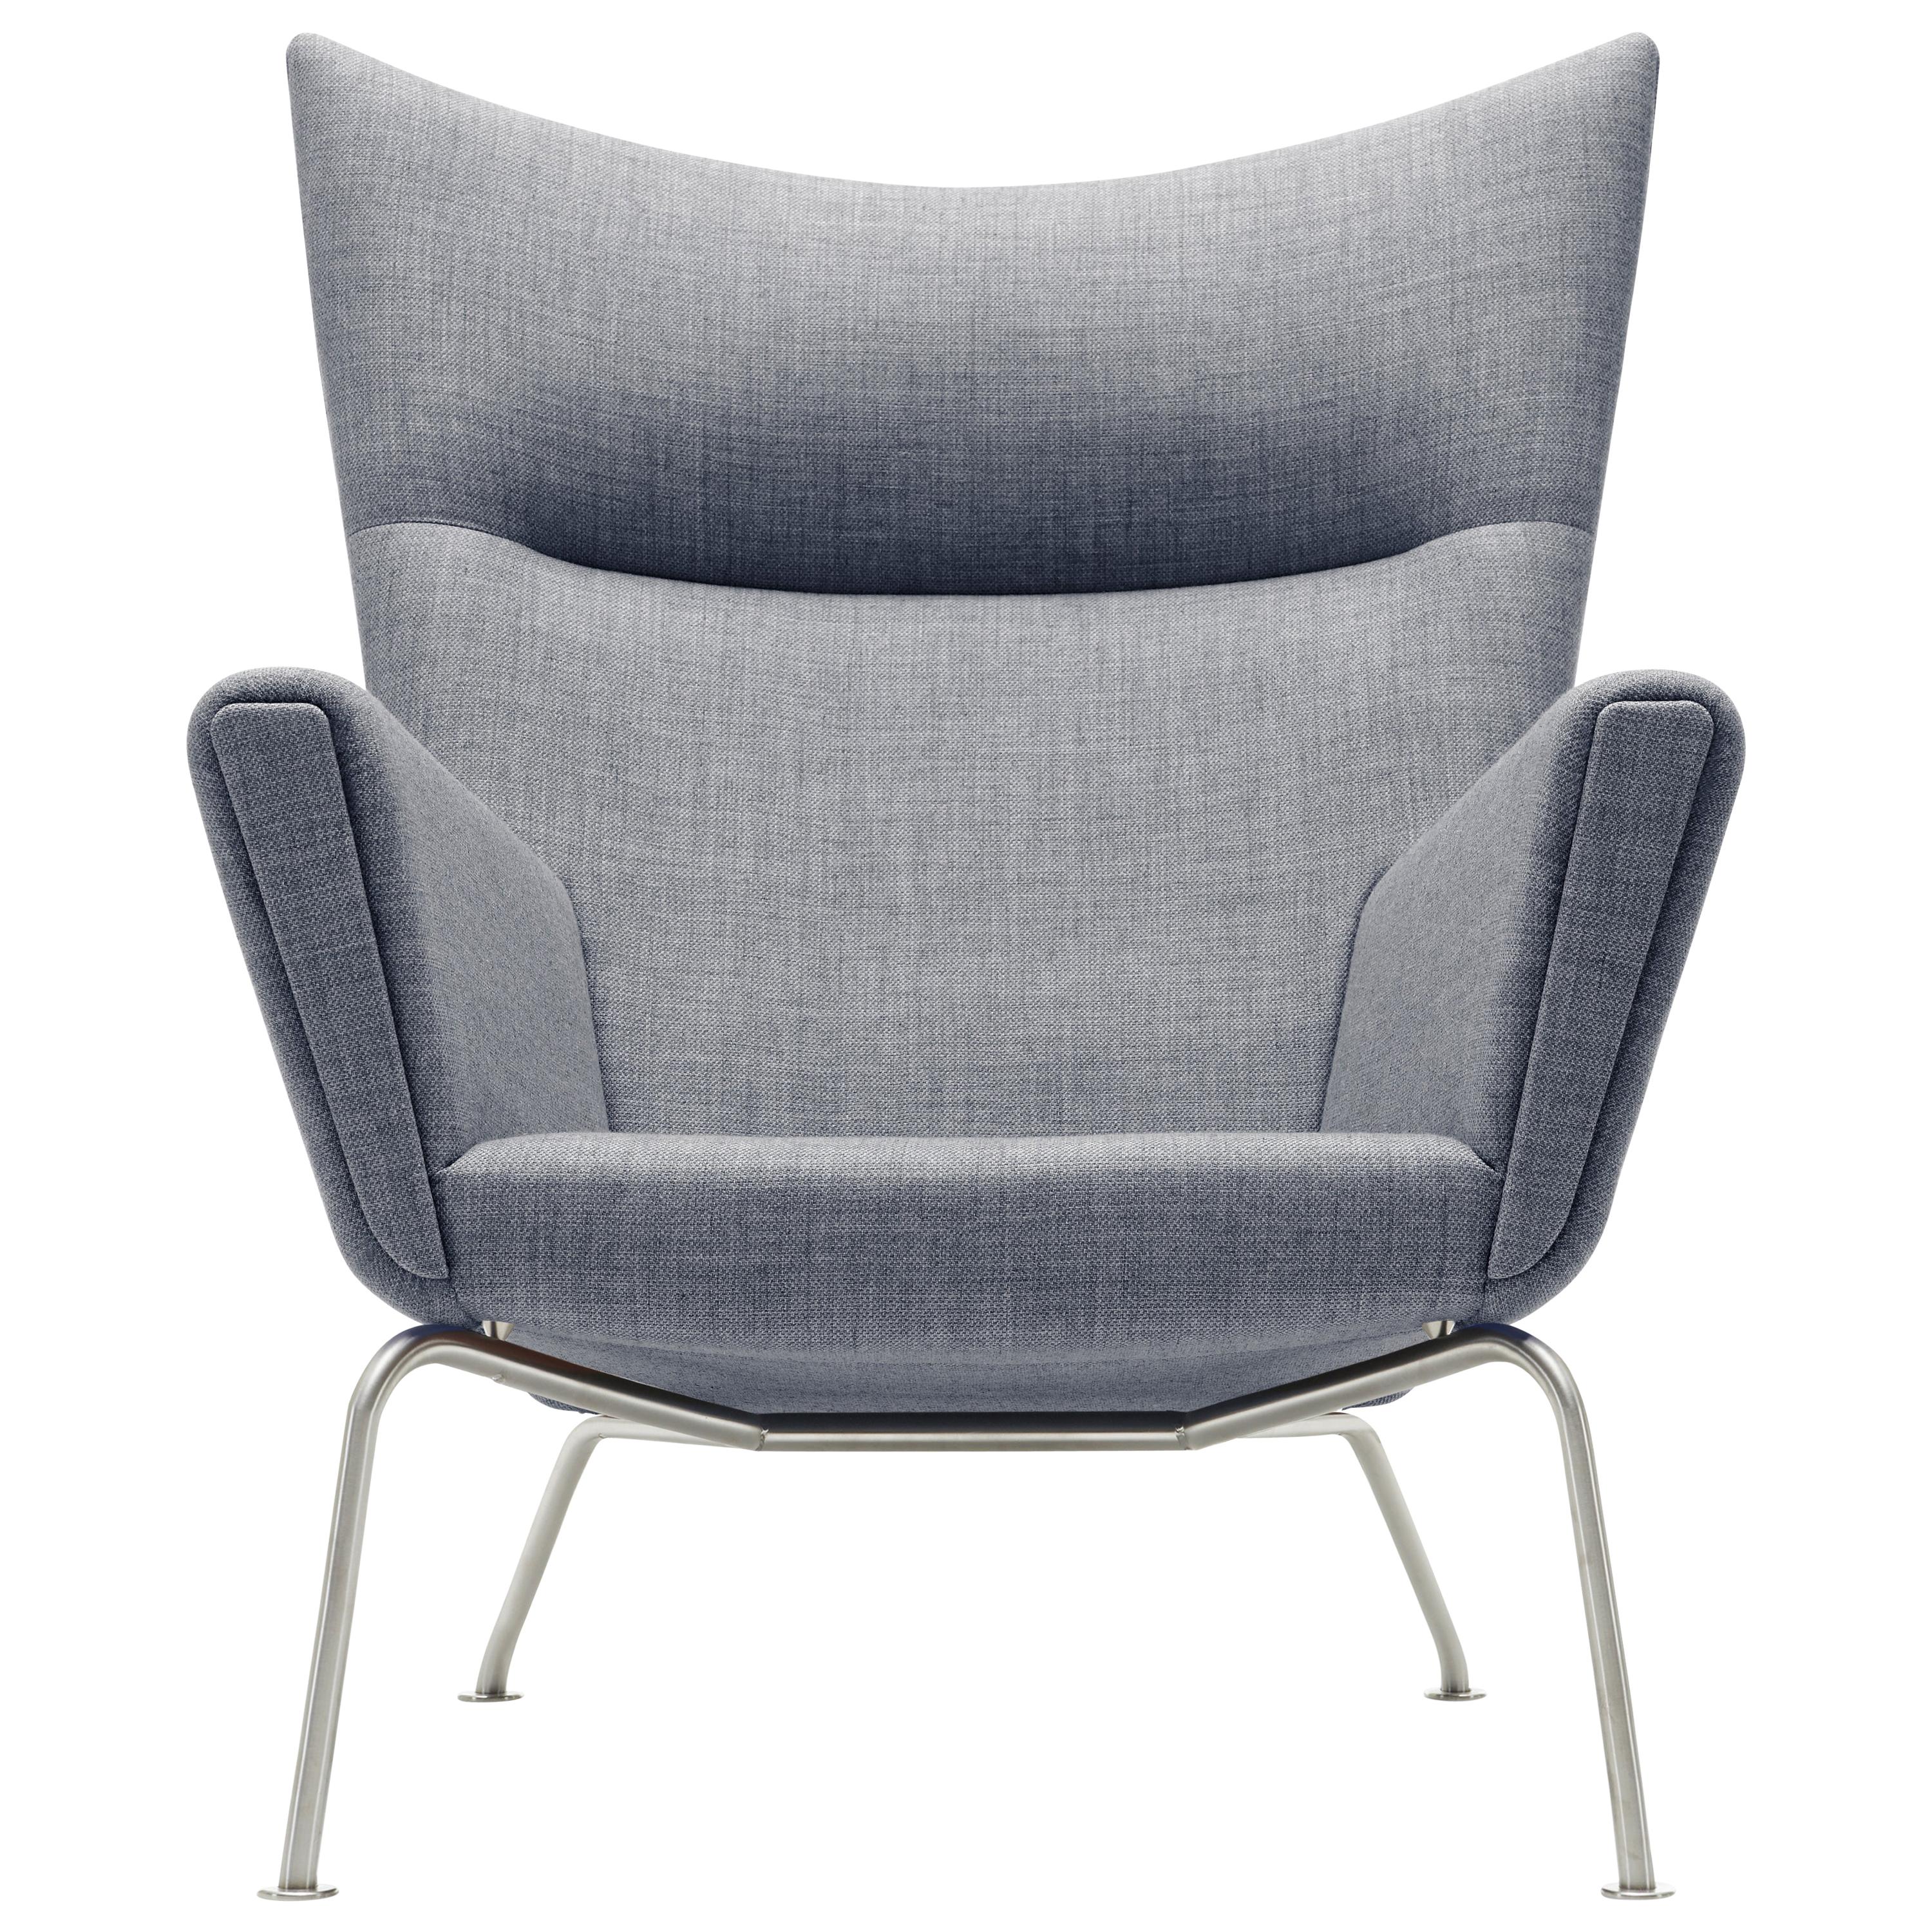 Gray (Kvadrat Fiord 151) CH445 Wing Chair in Fabric with Stainless Steel Base by Hans J. Wegner